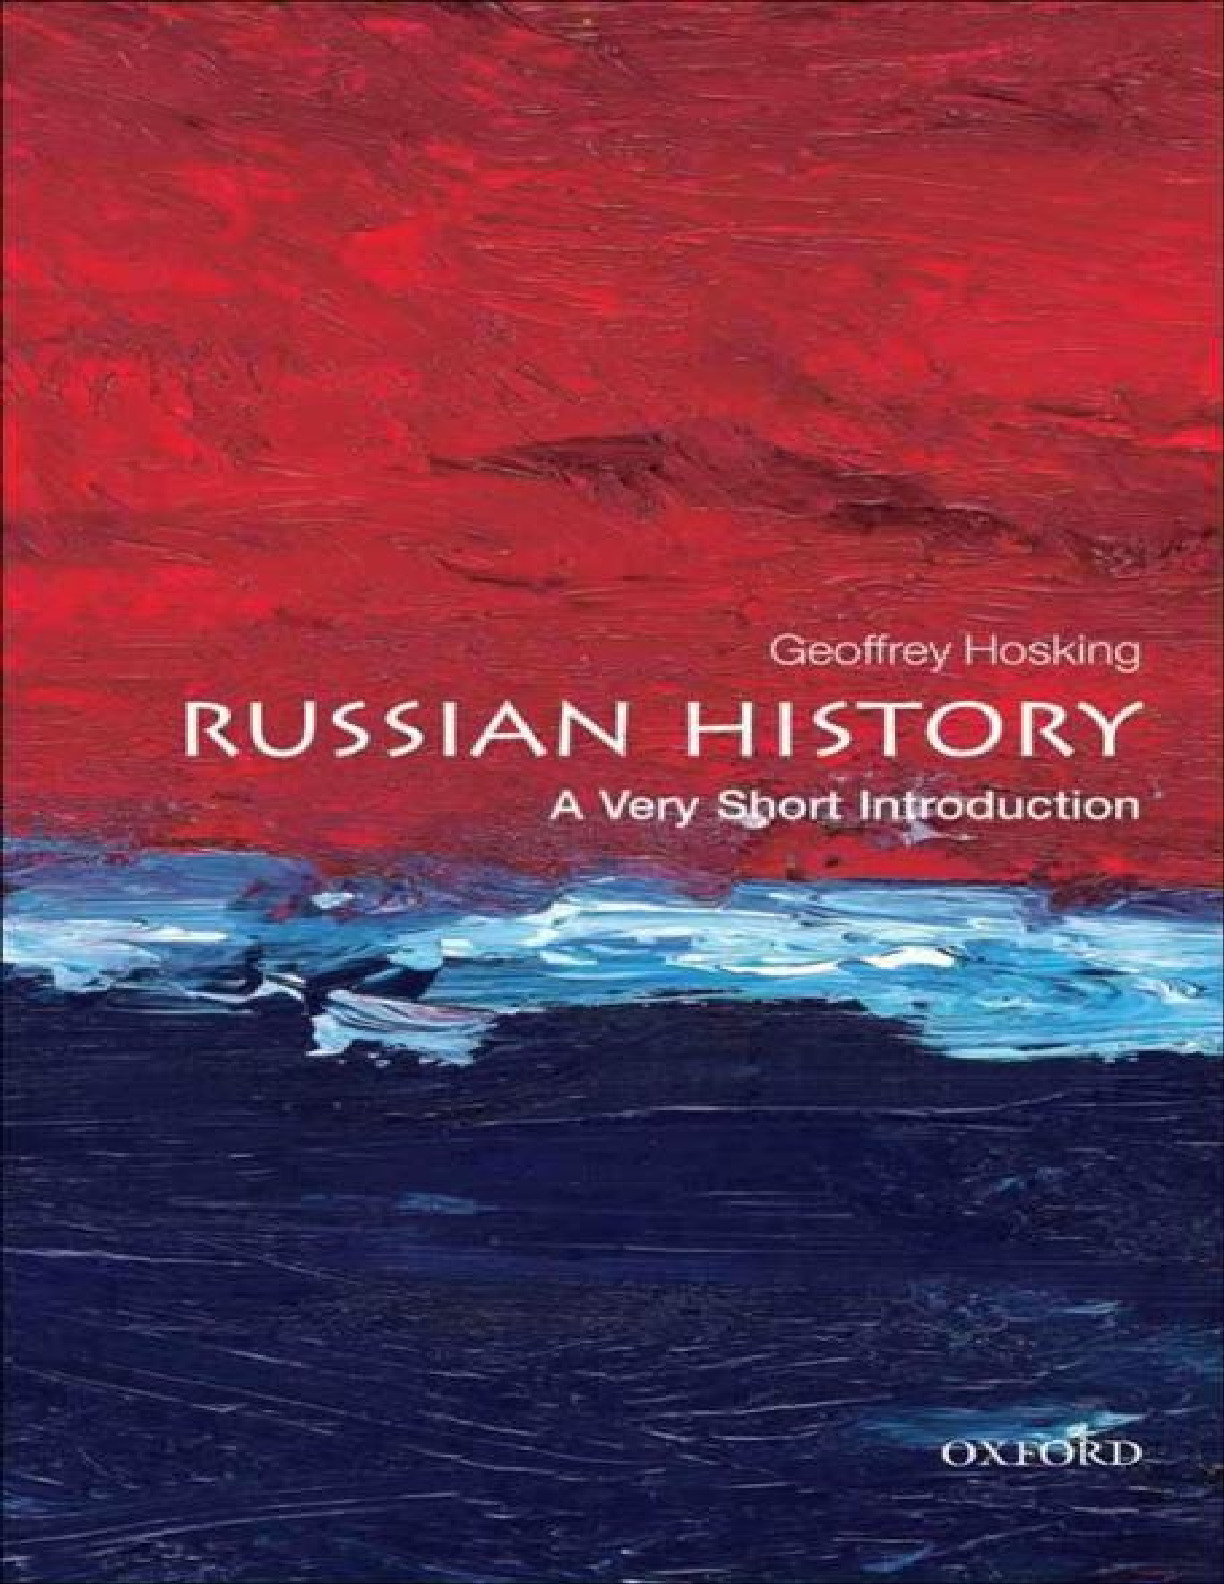 Russian history _ a very short introduction ( PDFDrive.com )